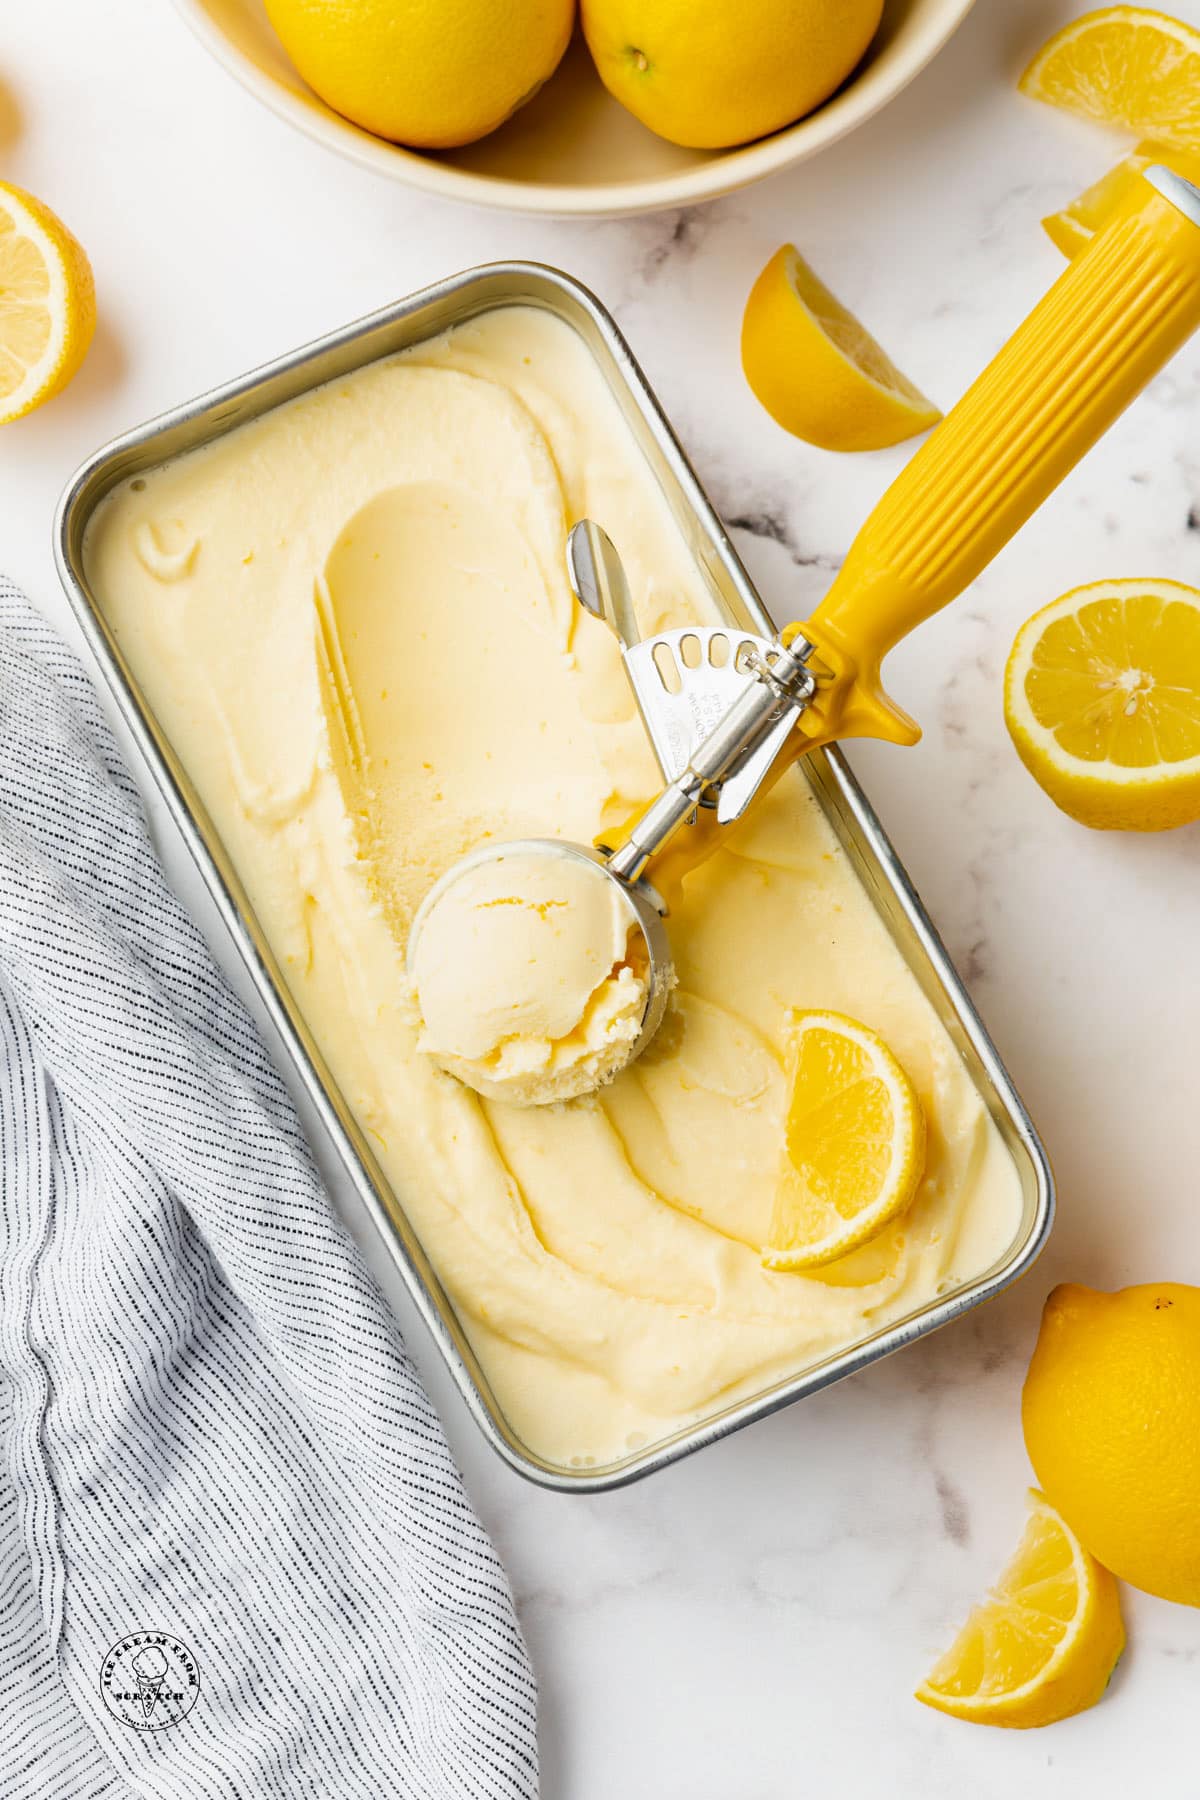 homemade lemon custard ice cream in a metal pan. A yellow-handled ice cream scoop is serving it. Lemon slices are on the counter next to the container.